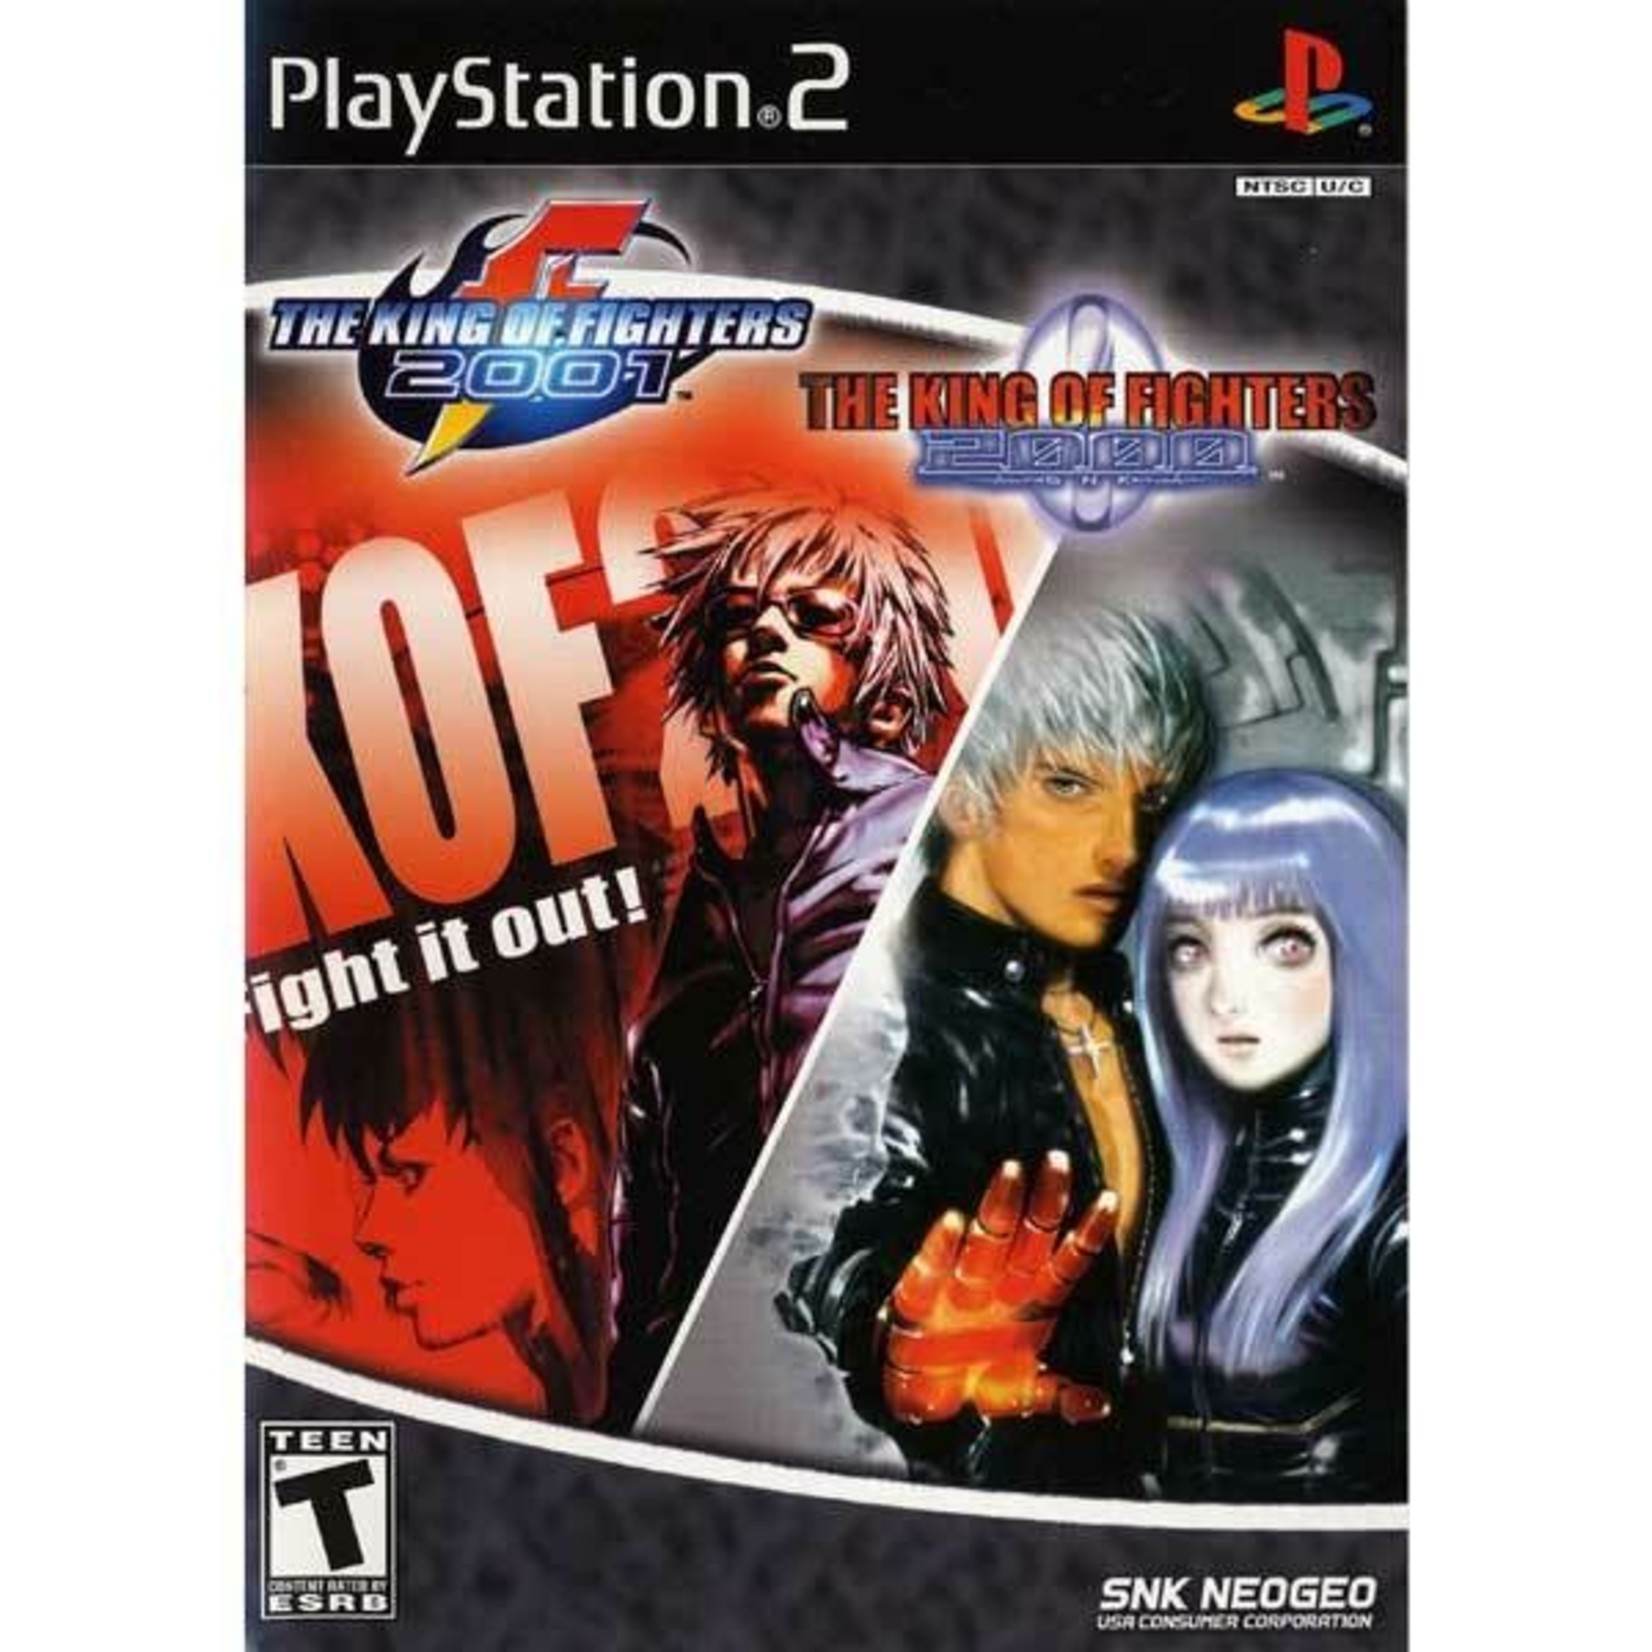 PS2U-THE KING OF FIGHTERS 00/01